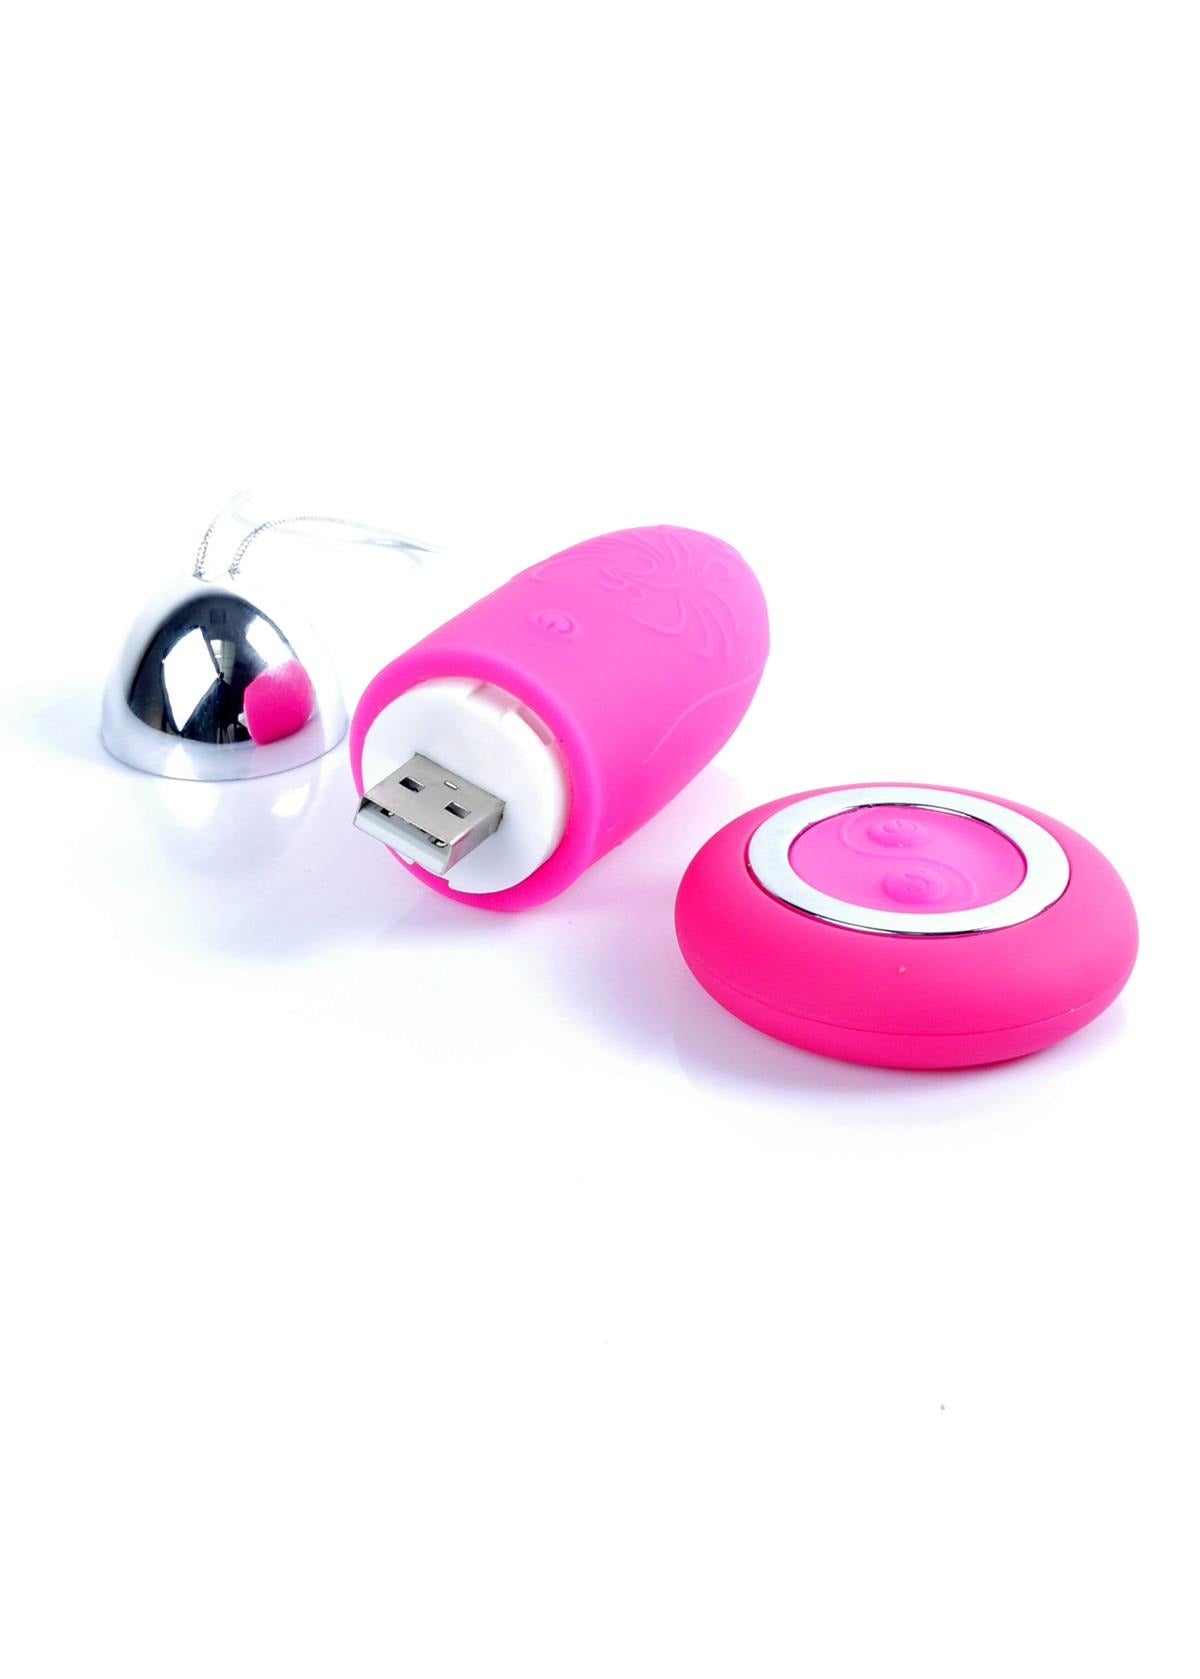 Bossoftoys - 26-00108 - Remoted controller egg - USB - Pink